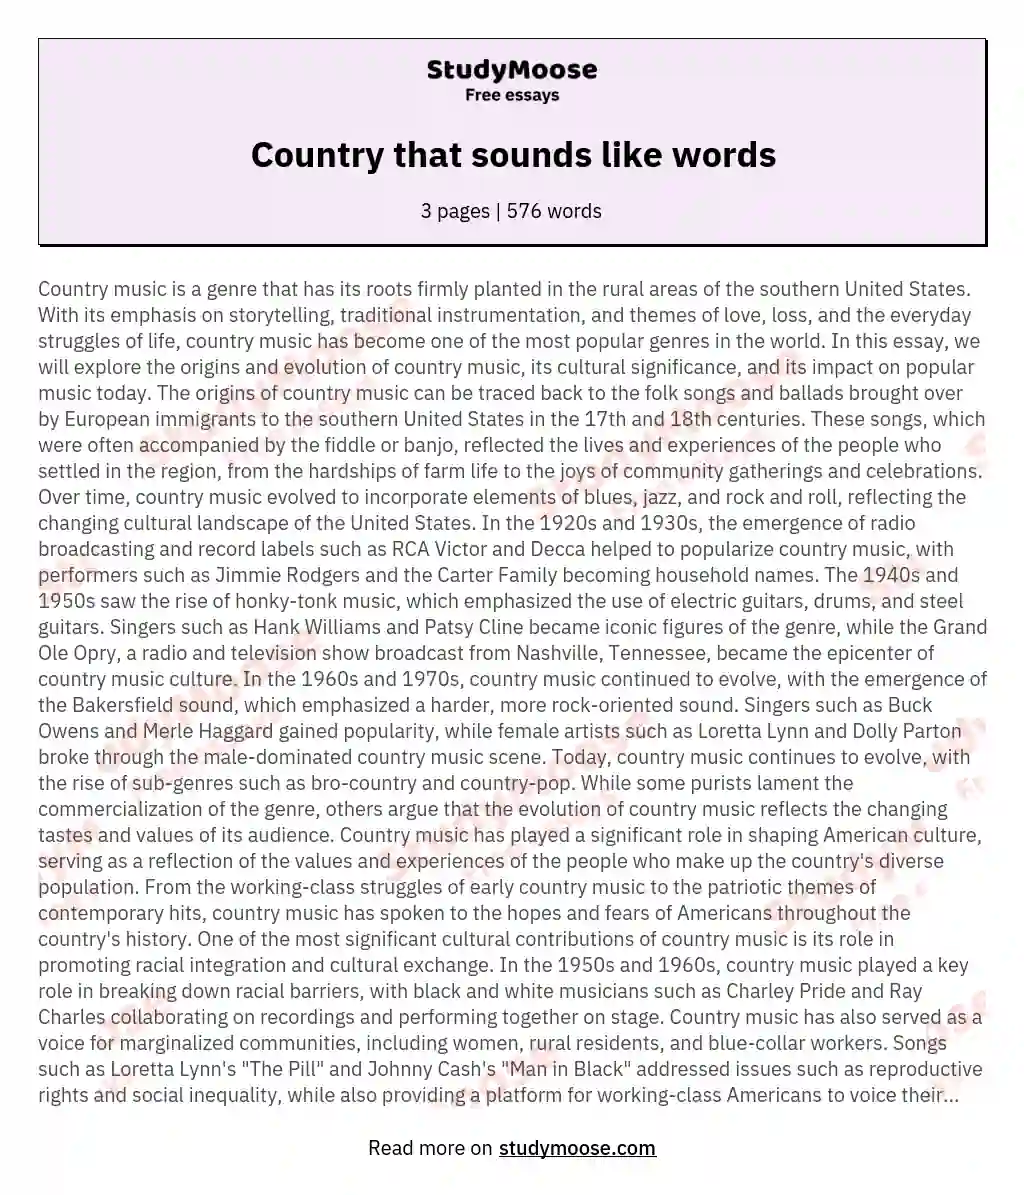 Country that sounds like words essay